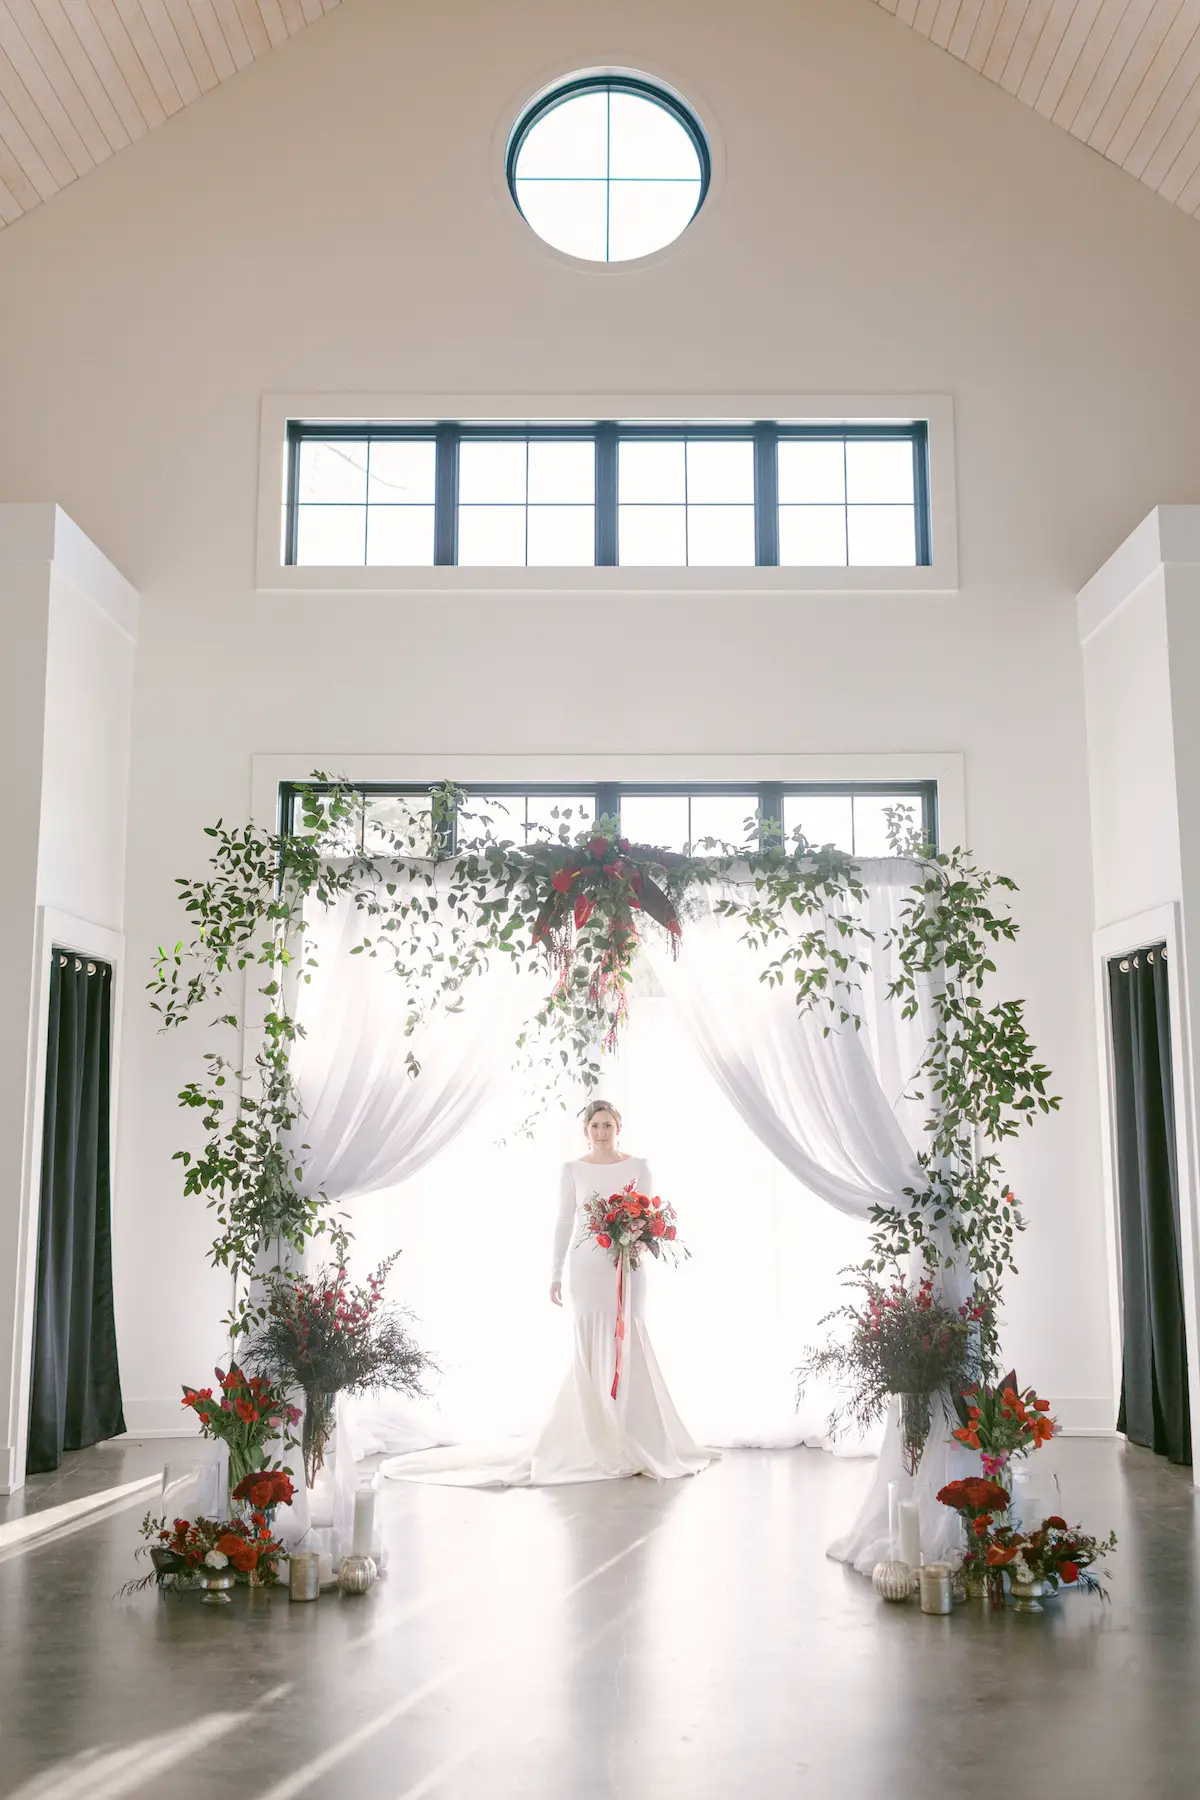 Modern wedding ceremony decor and arch - 5th Fine Art Photography